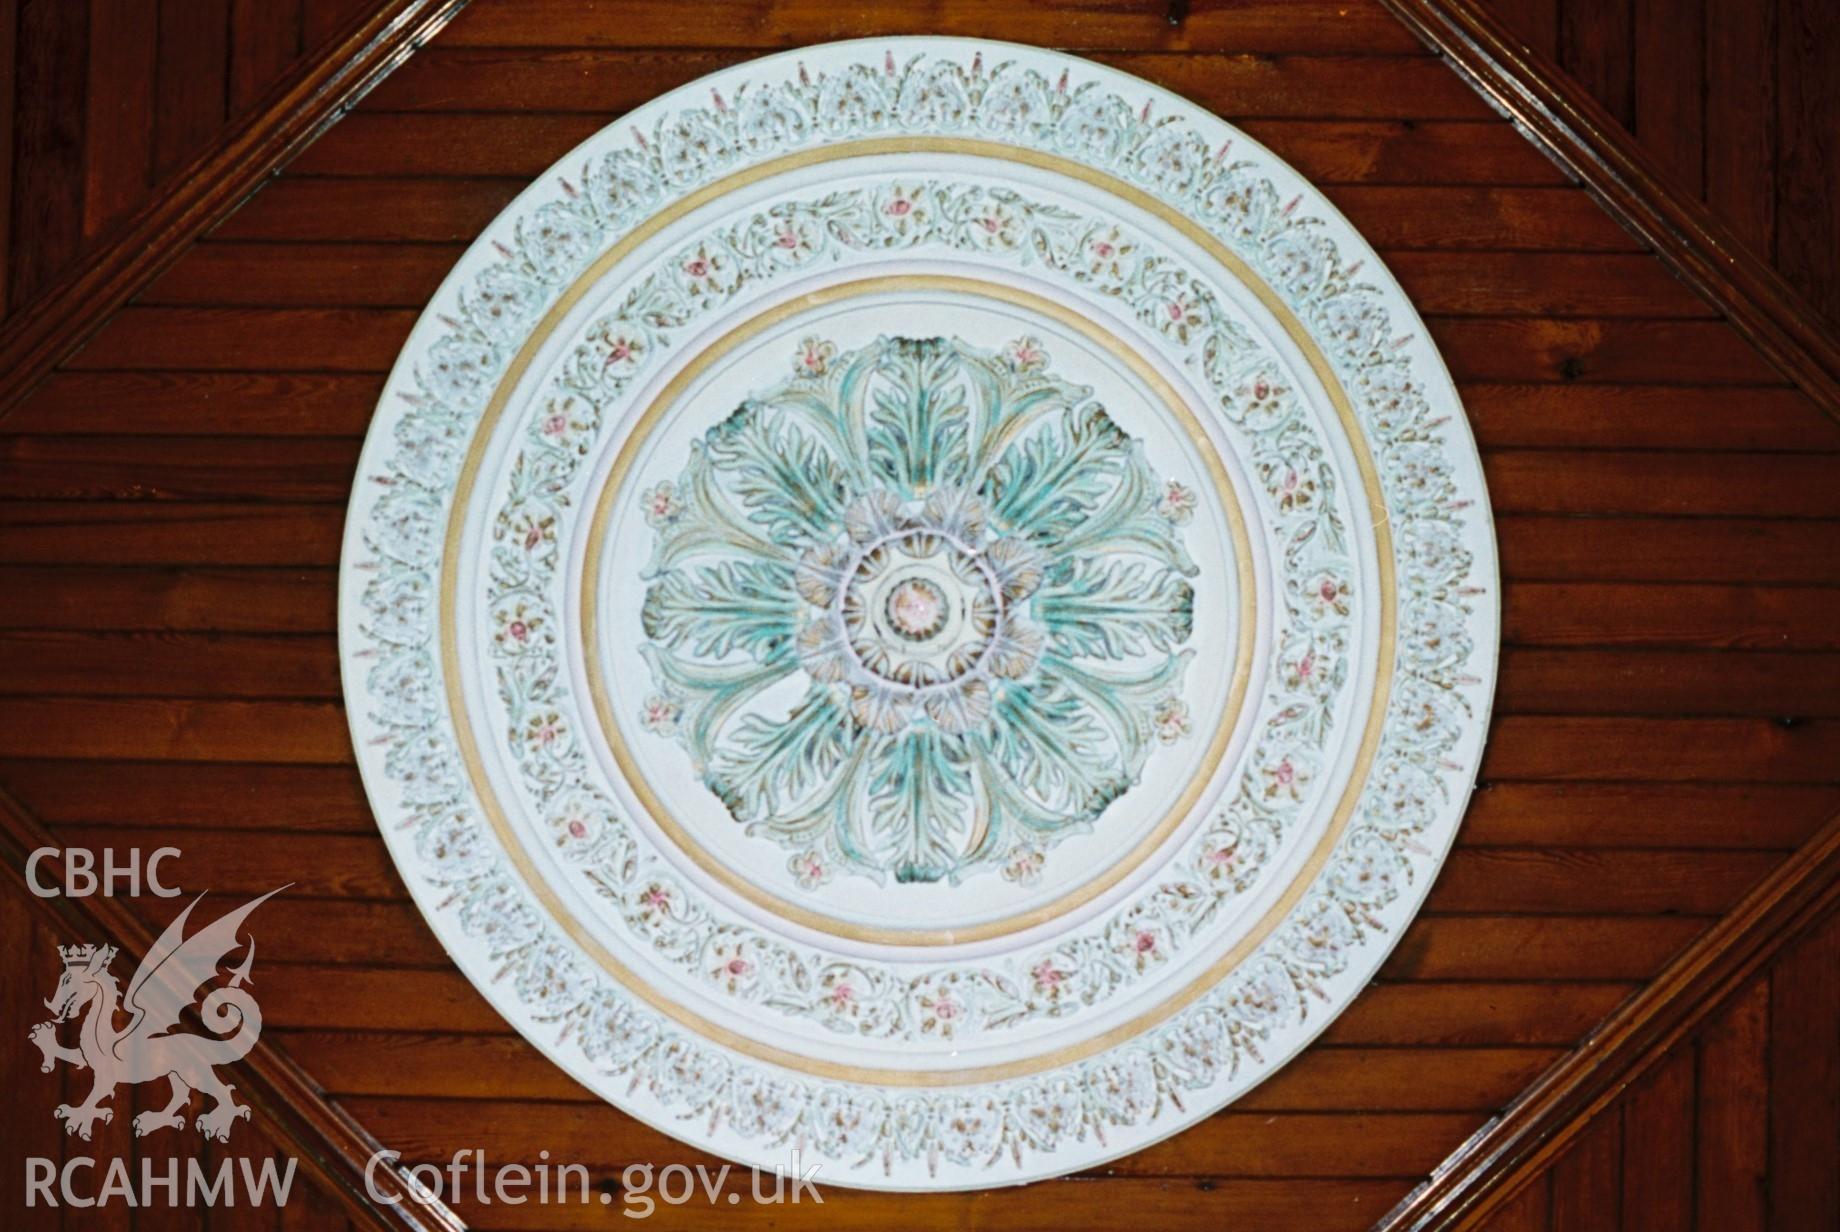 Digital colour photograph showing Salem Newydd chapel - ceiling rose, one of two.